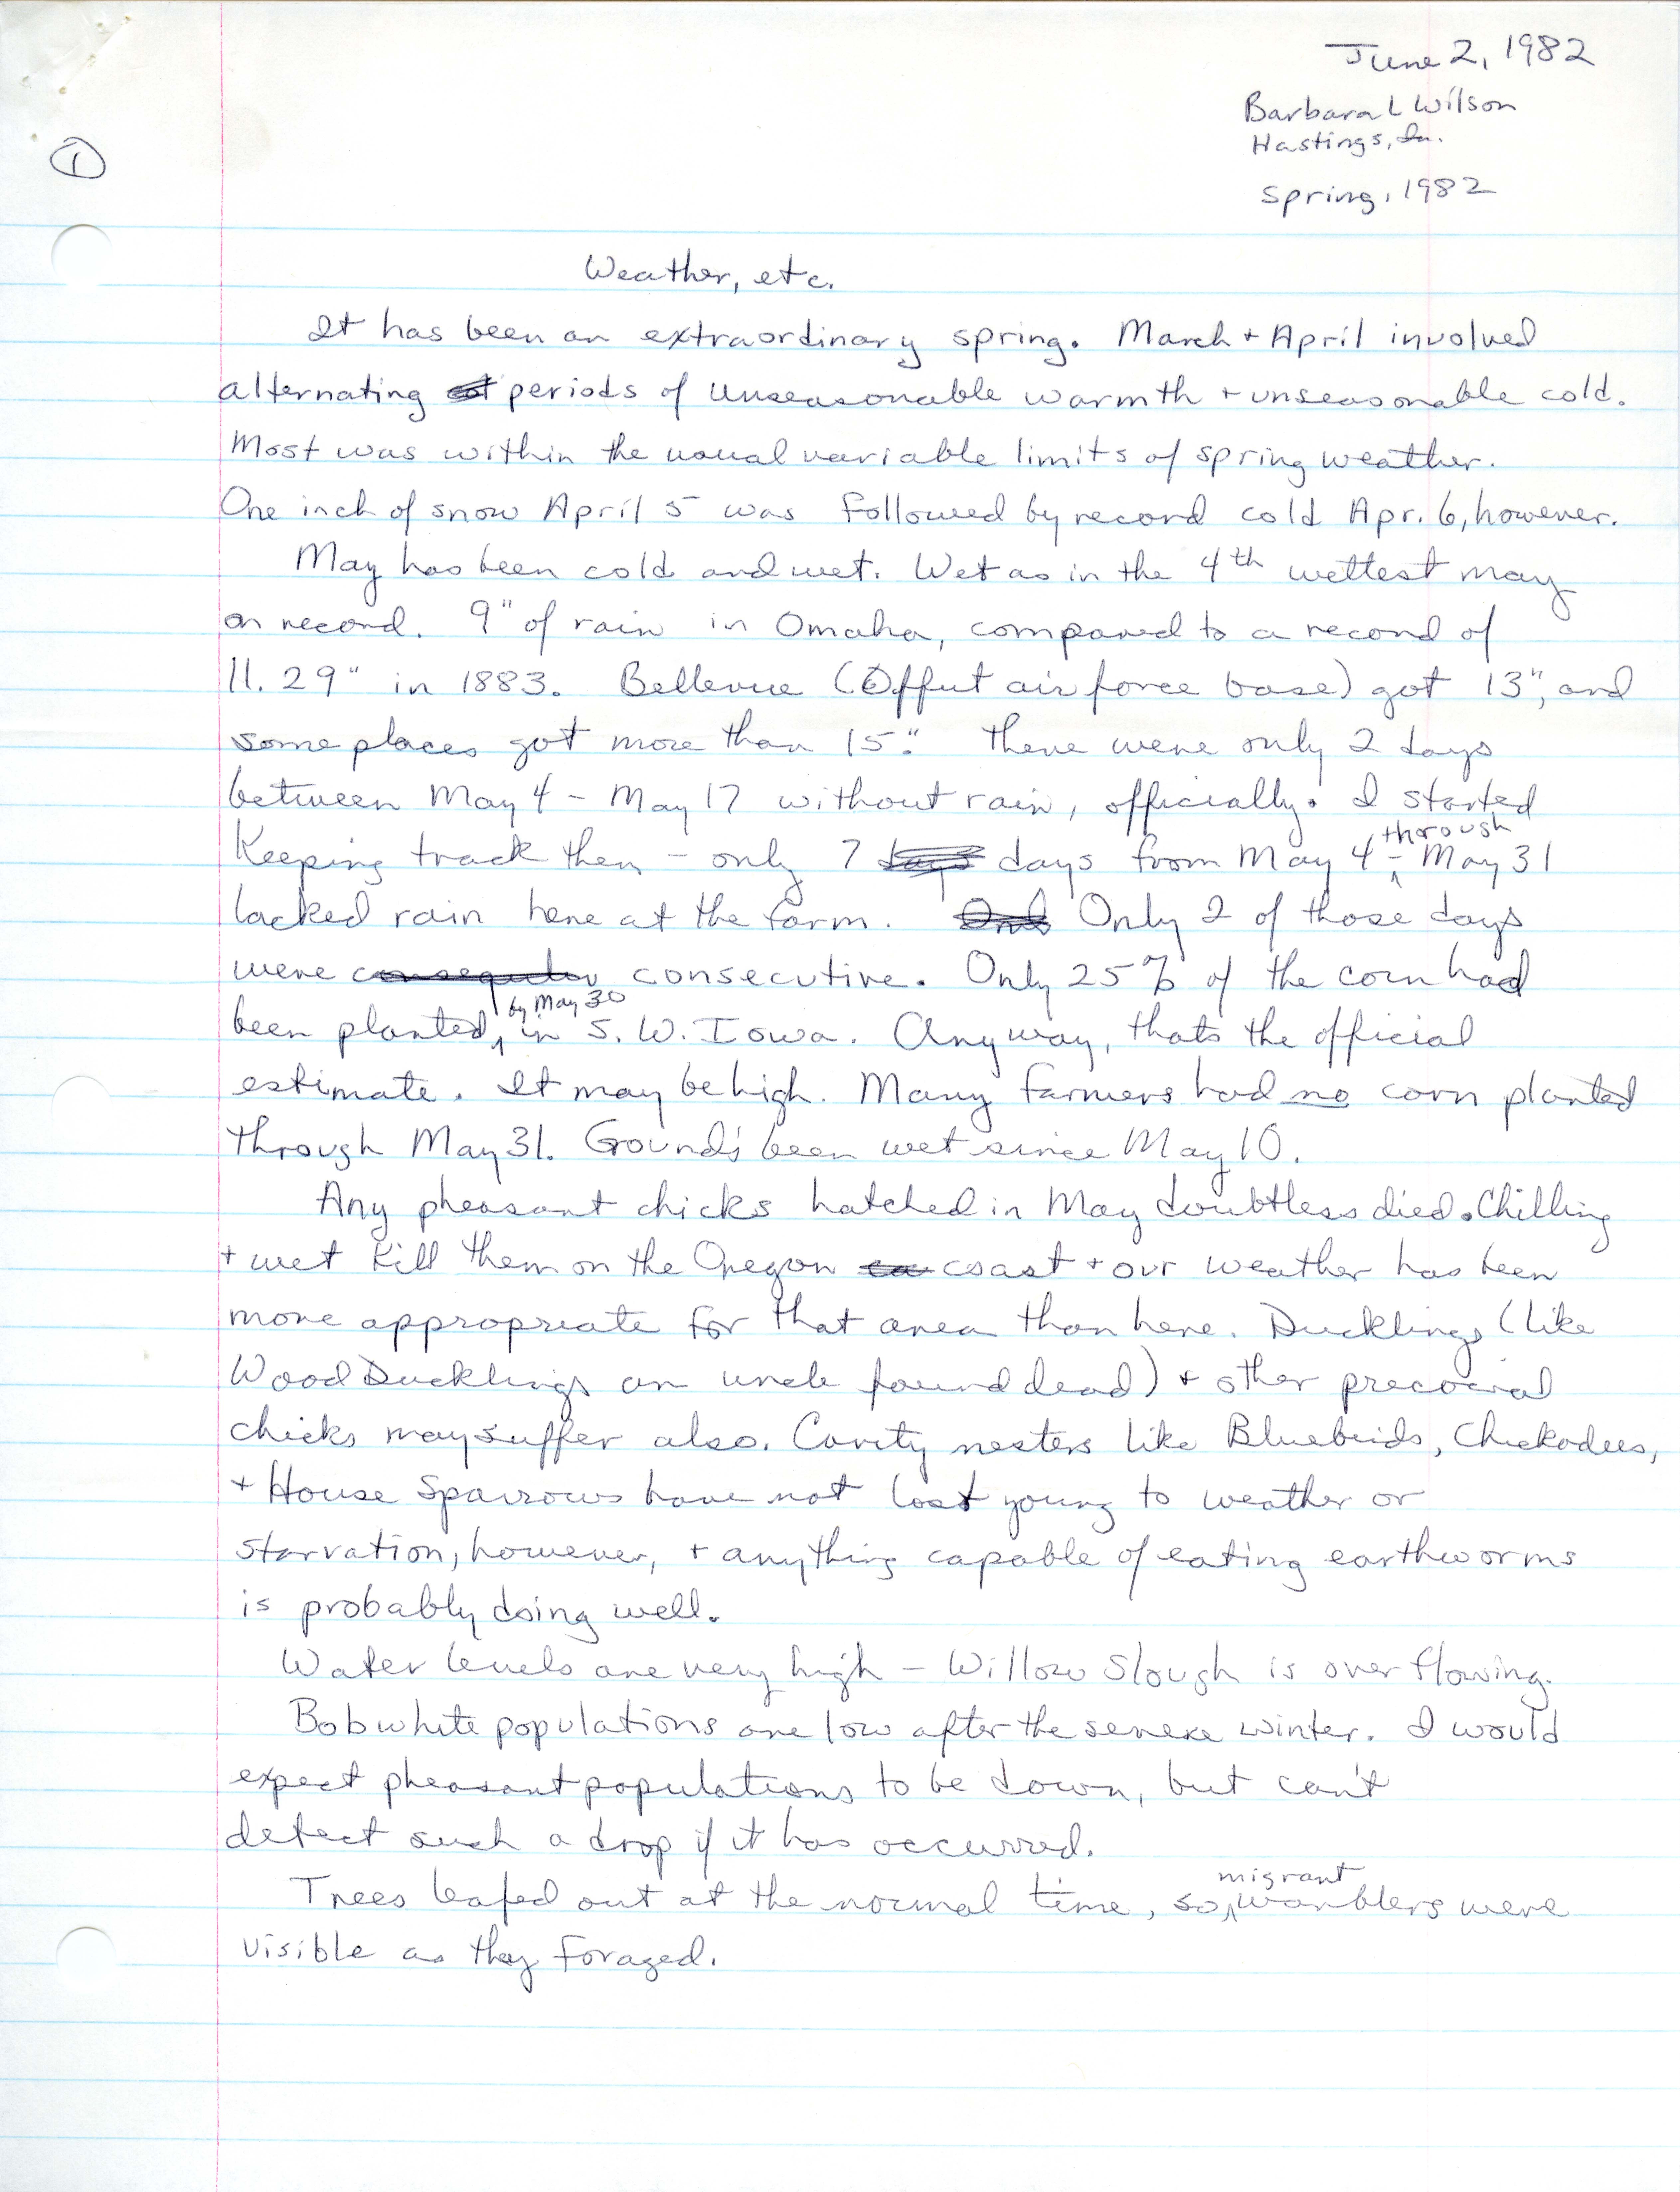 Field notes and a letter to Thomas H. Kent contributed by Barbara L. Wilson, spring 1982